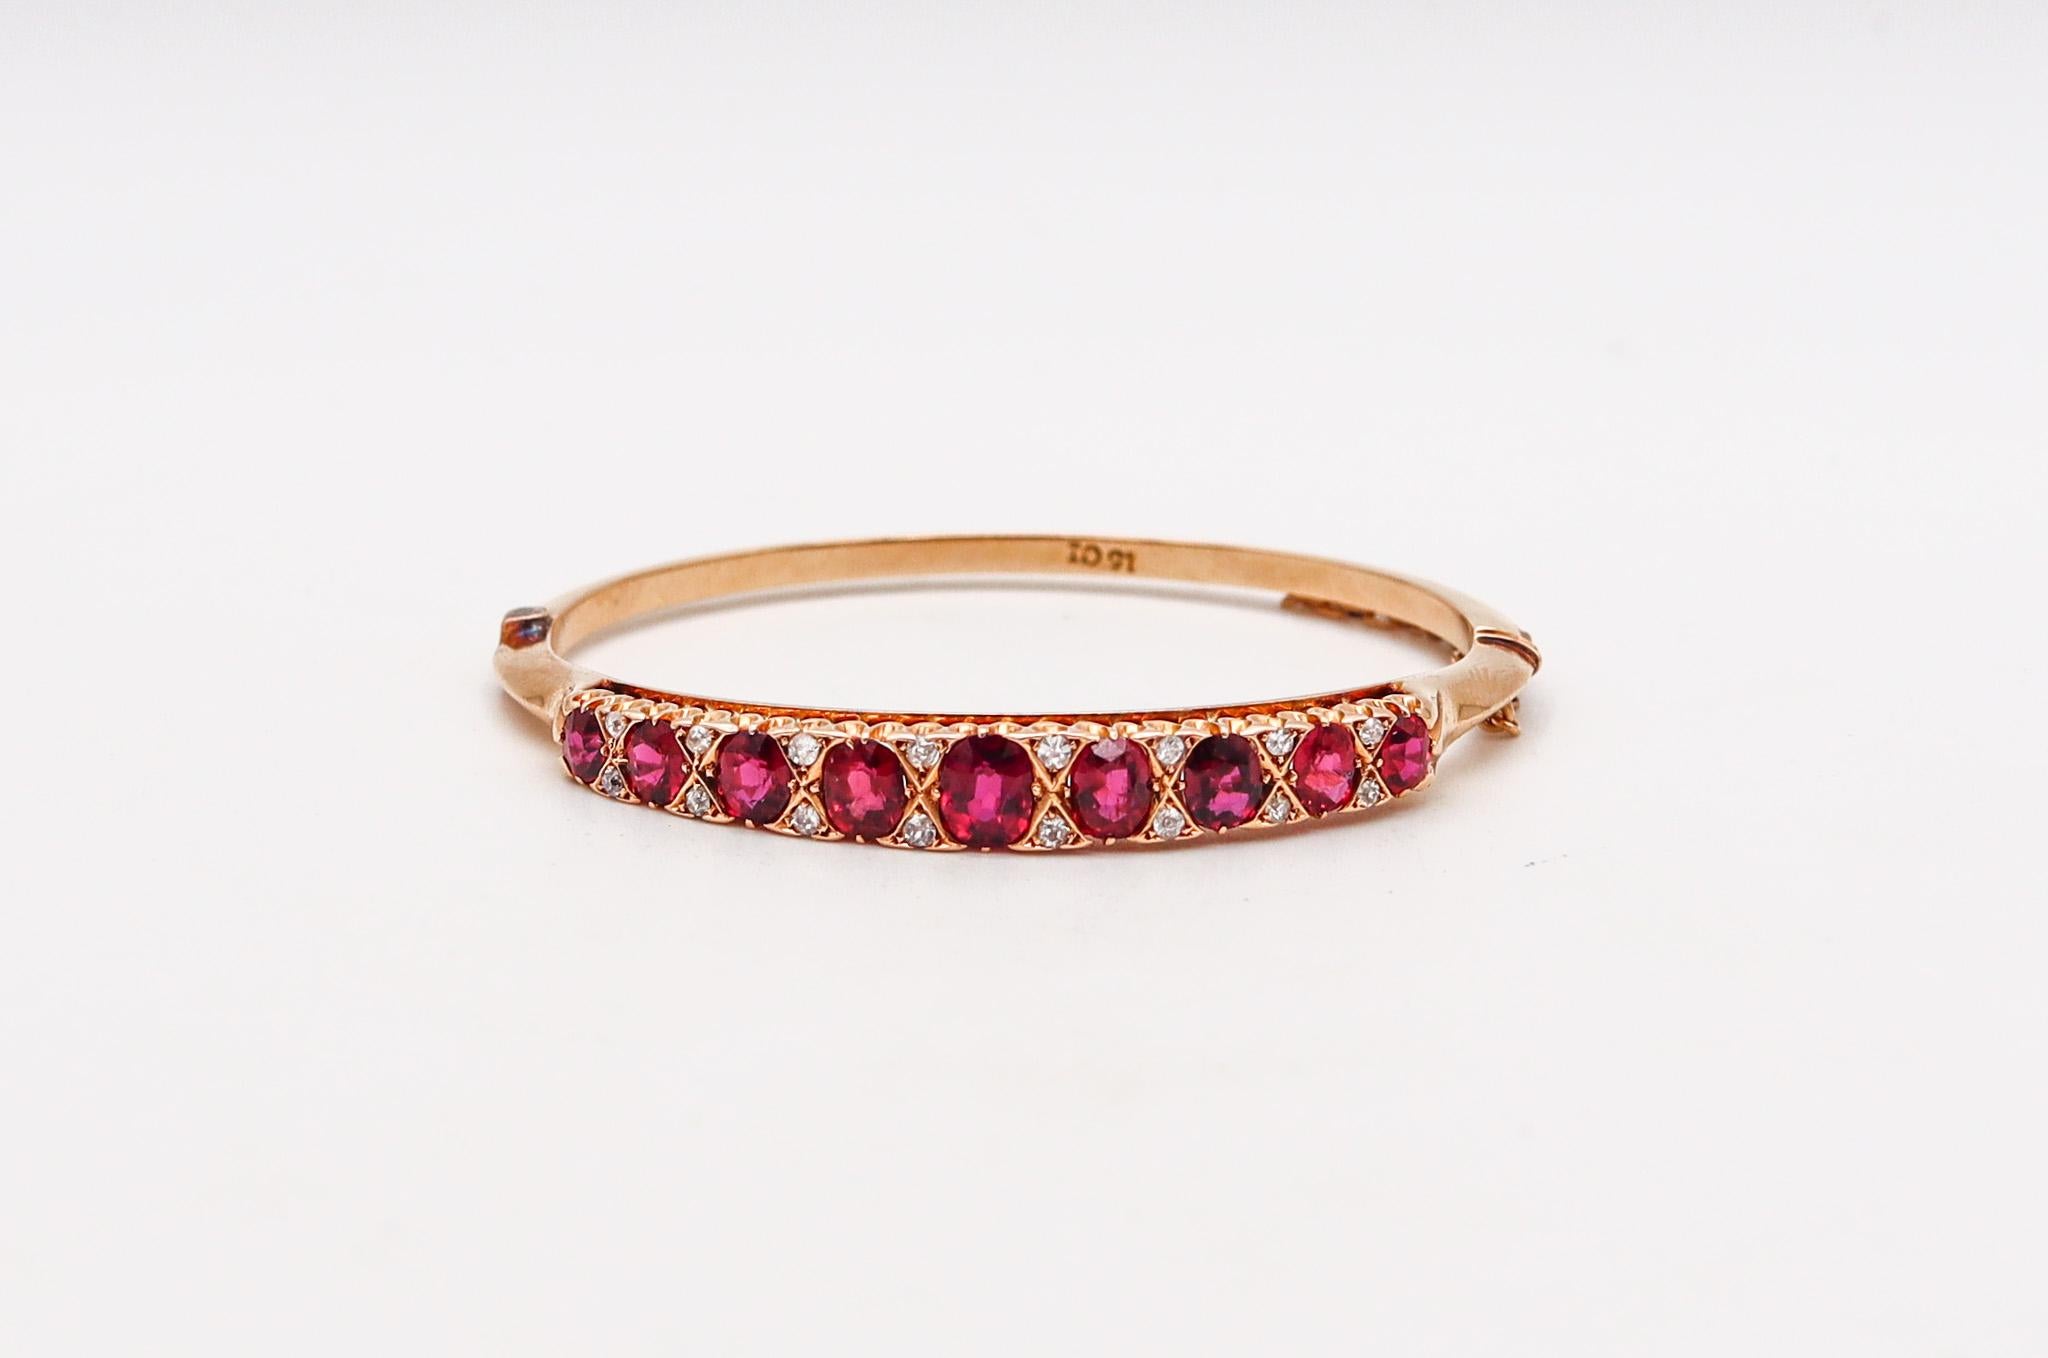 Victorian bangle bracelet with natural non heated rubies.

Gorgeous bangle bracelet, created in England during the Victorian period, back in the 1880. This bracelet has been crafted with traditional classic patterns in solid yellow gold of 15 karats